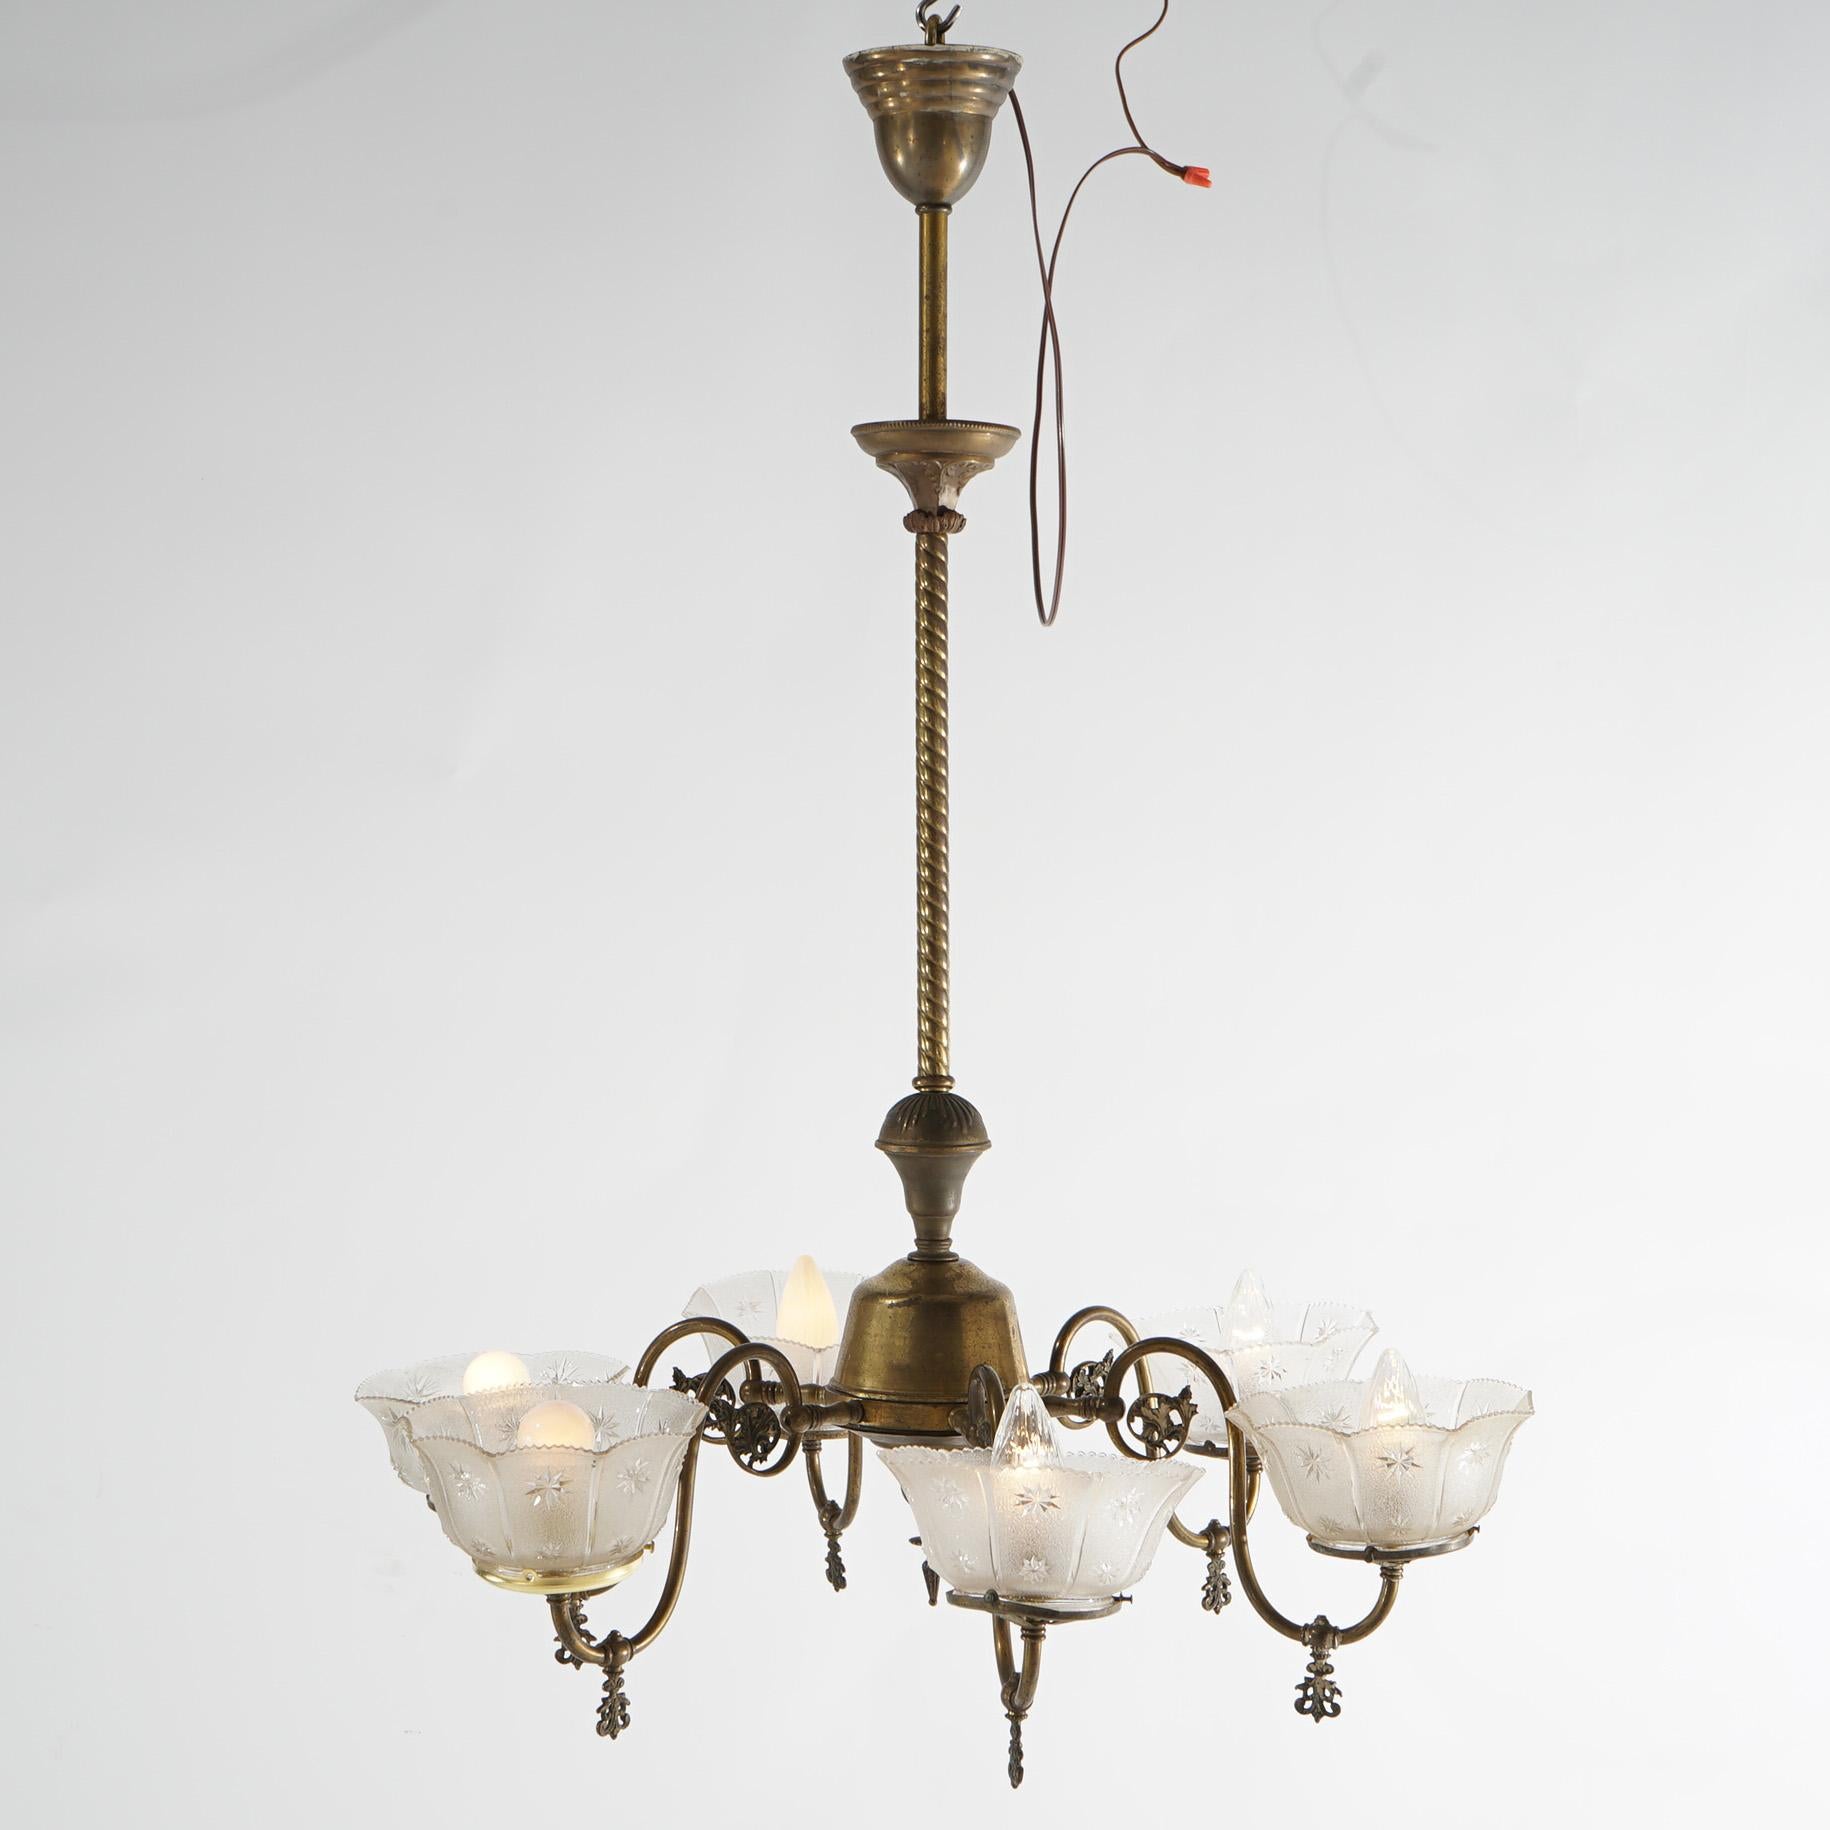 Victorian Antique Six Arm Brass Gas Chandelier with Glass Shades, Electrified, Circa 1890